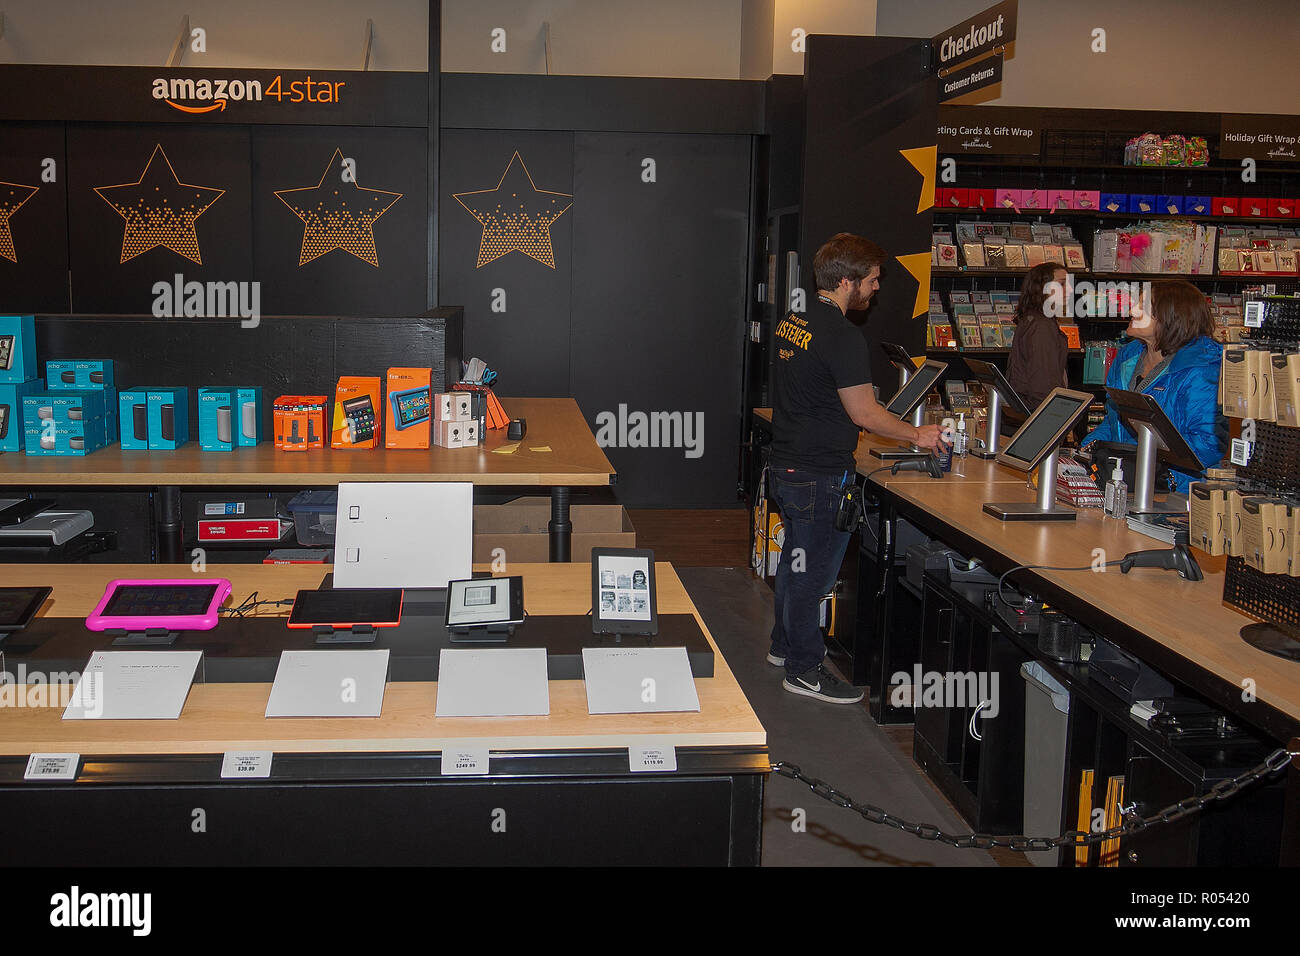 Amazon Store High Resolution Stock Photography and Images - Alamy